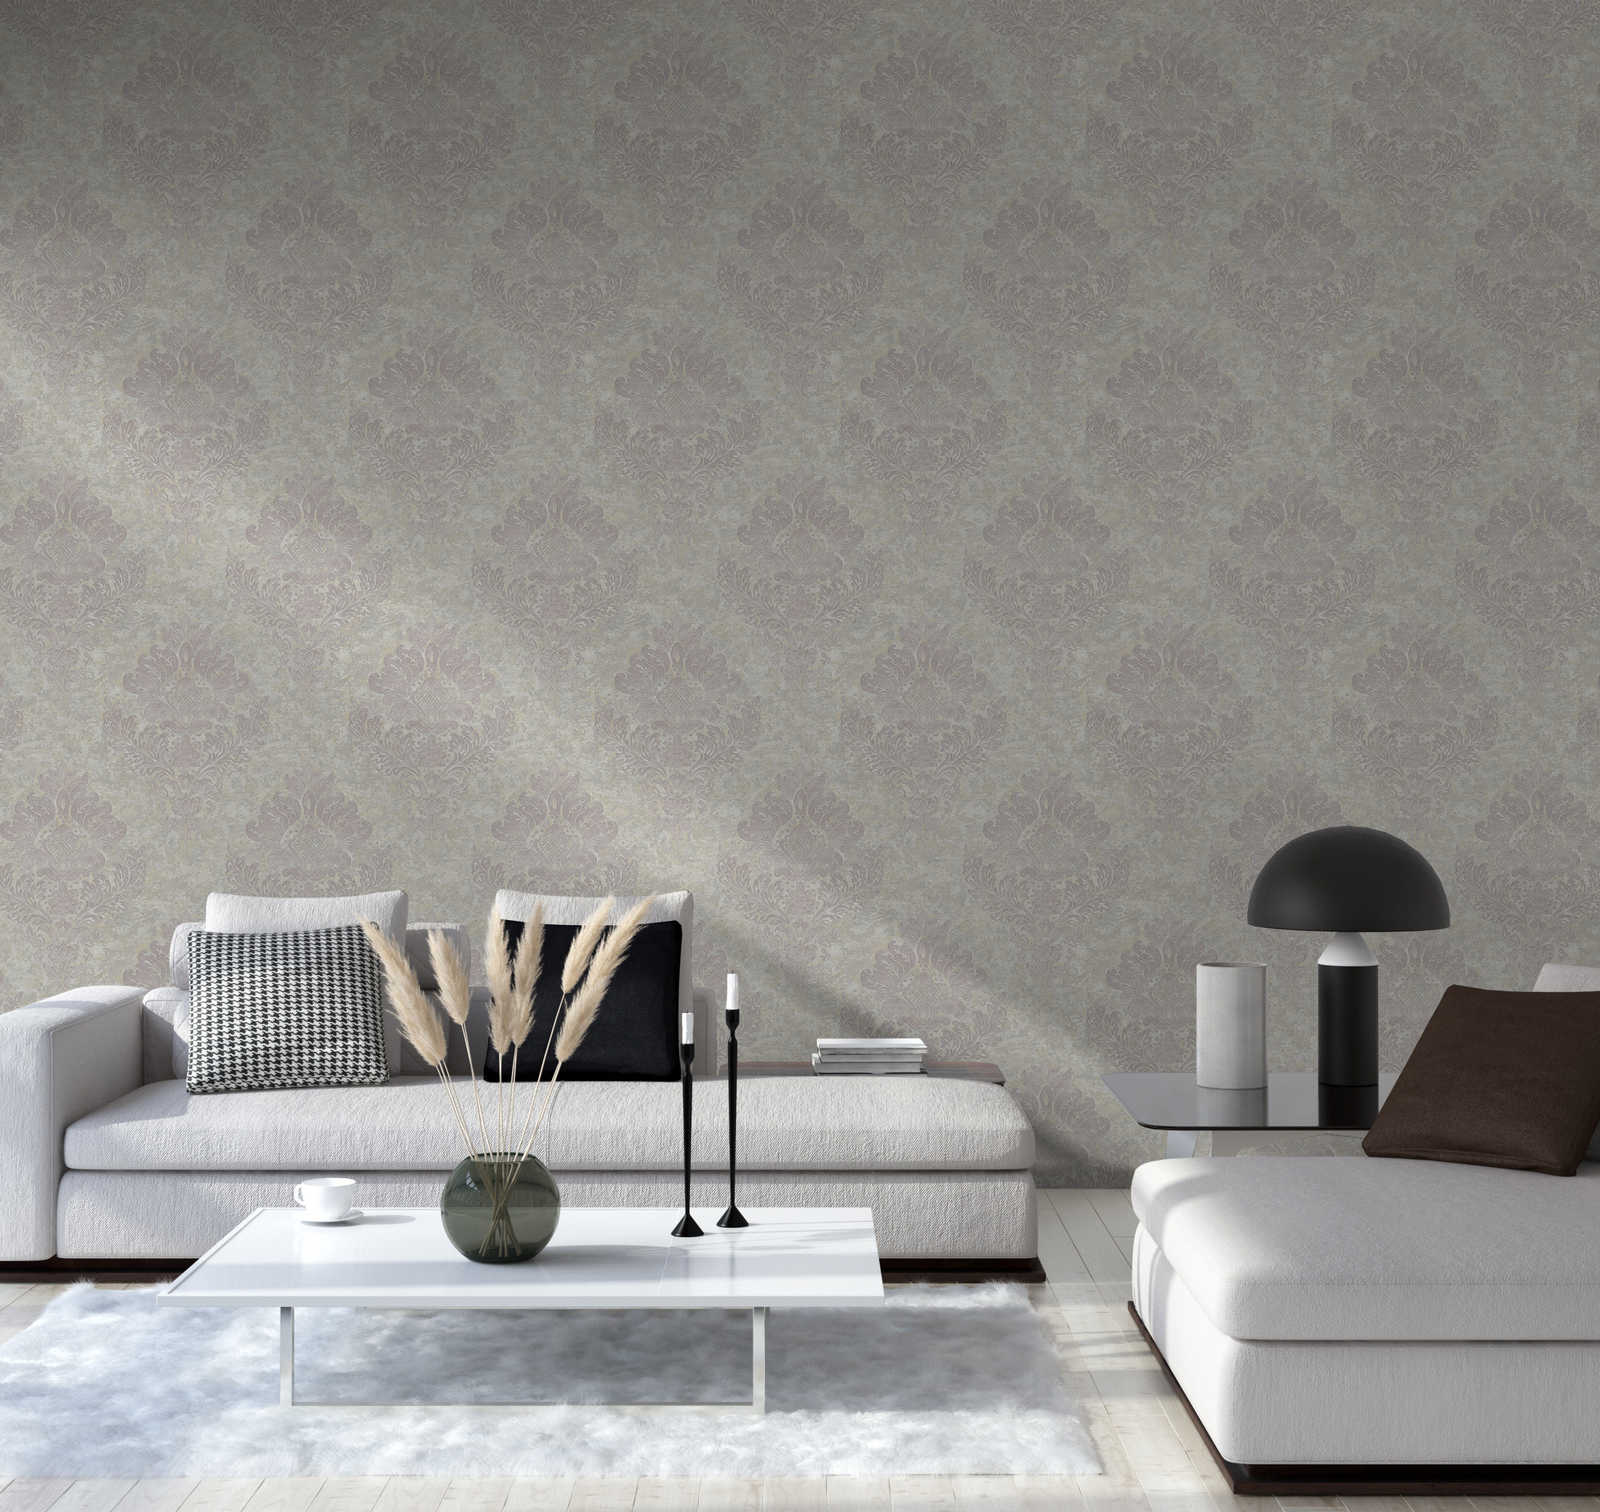             Wallpaper with floral ornaments & metallic effect - beige, grey
        